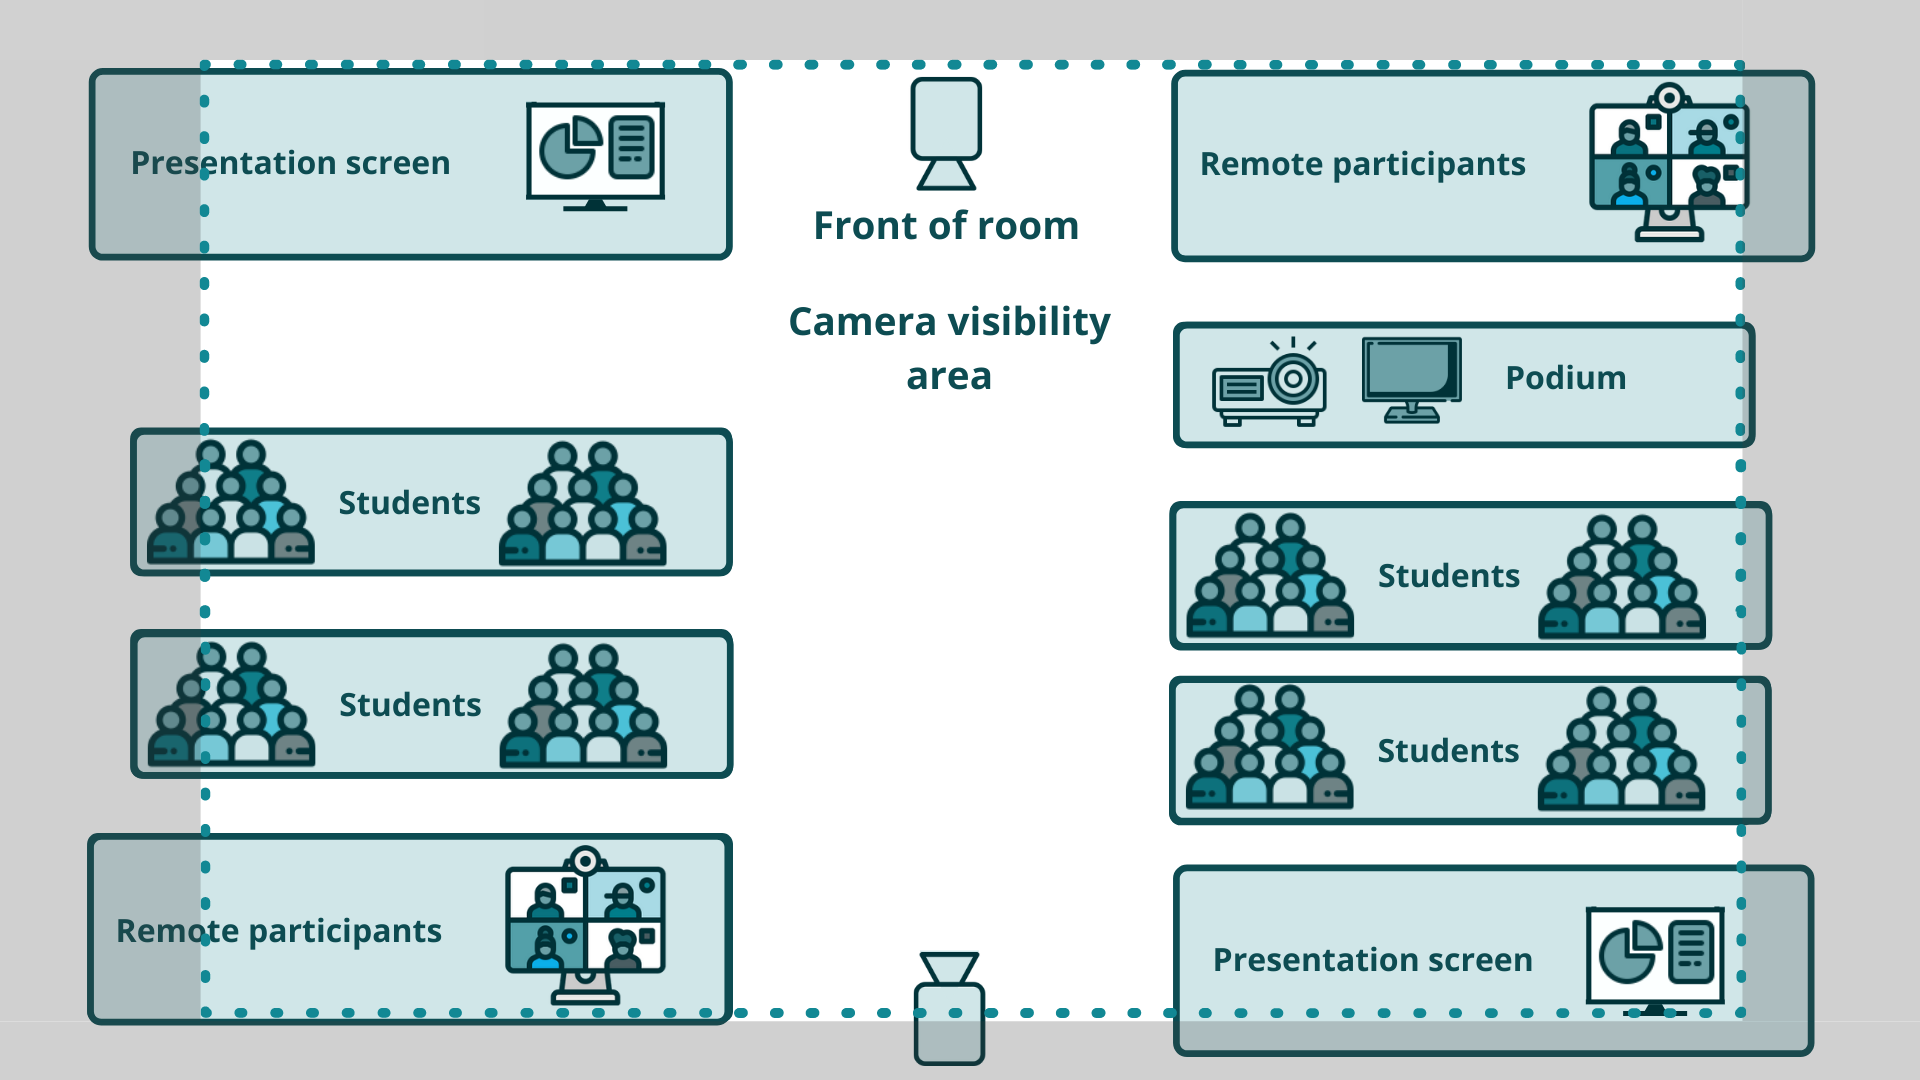 Diagram of a Trimodal room with an overlaid rectangle illustrating the visibility area of the cameras, which is approximately 80% of the room on center .